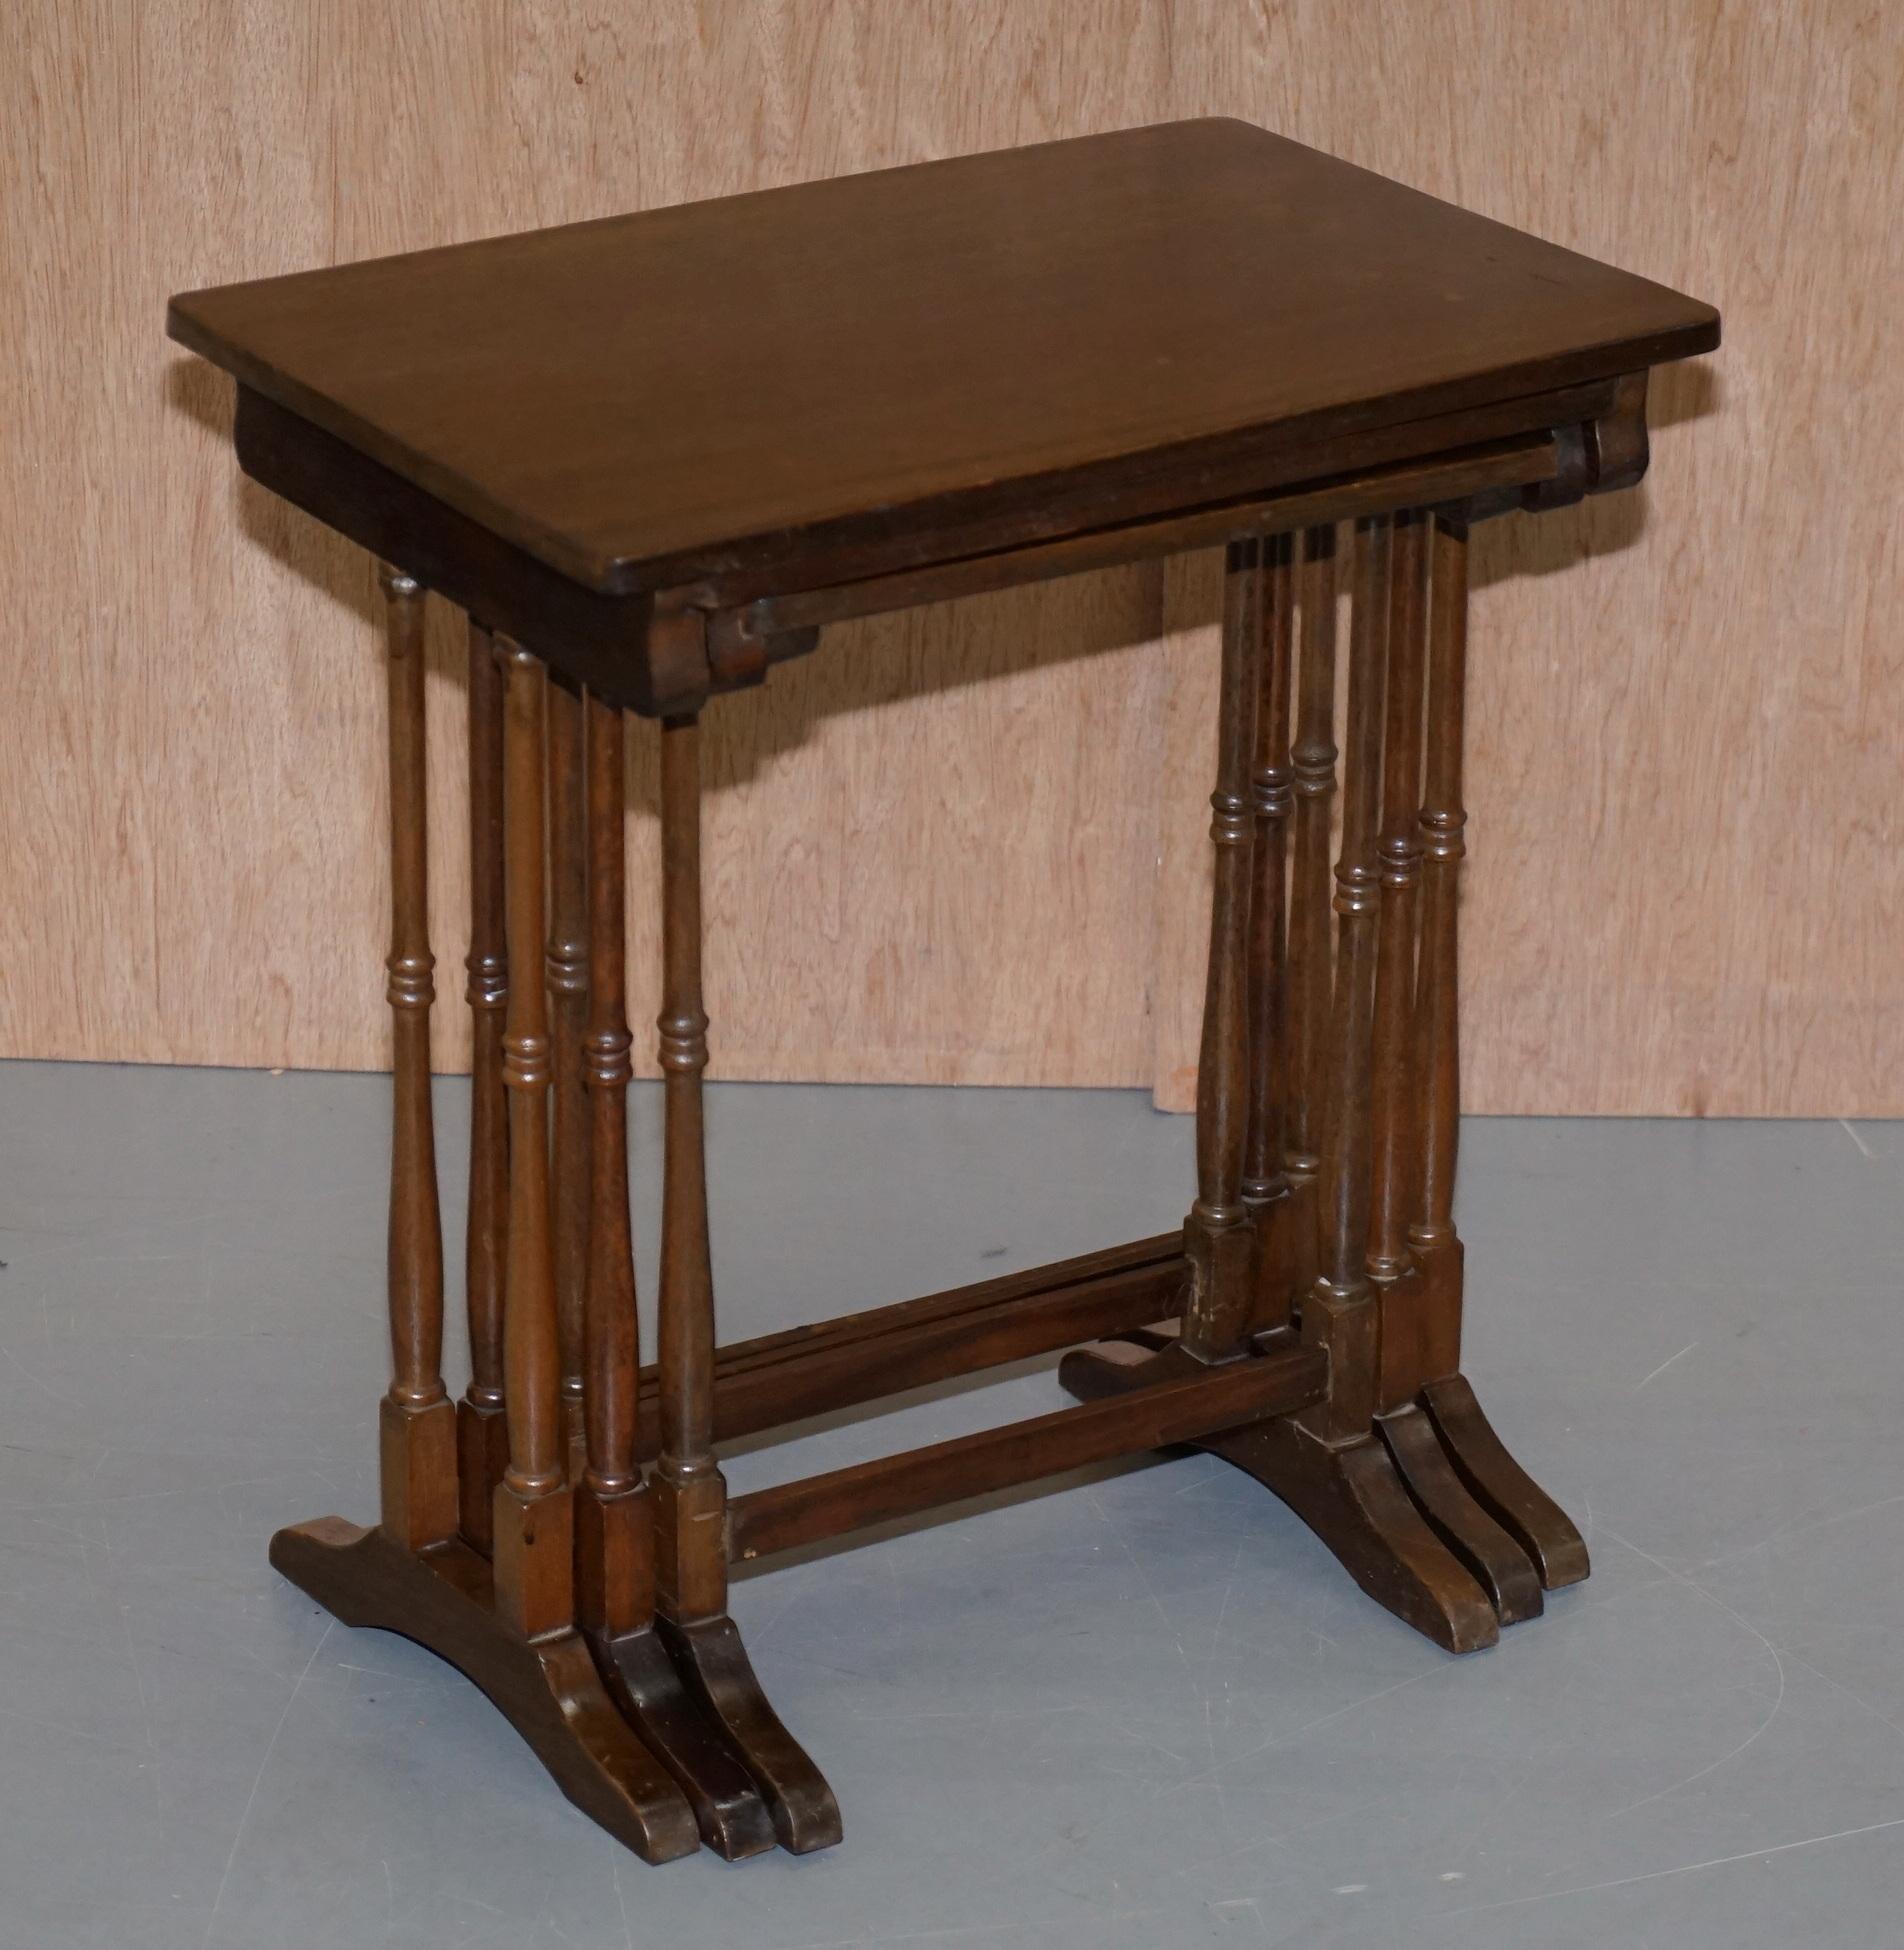 We are delighted to offer for sale this nice vintage circa 1940’s nest of three English Mahogany tables with nicely carved legs

A good decorative set, they have famboo carved legs which dates back to the 1800’s, it’s a very stylish and